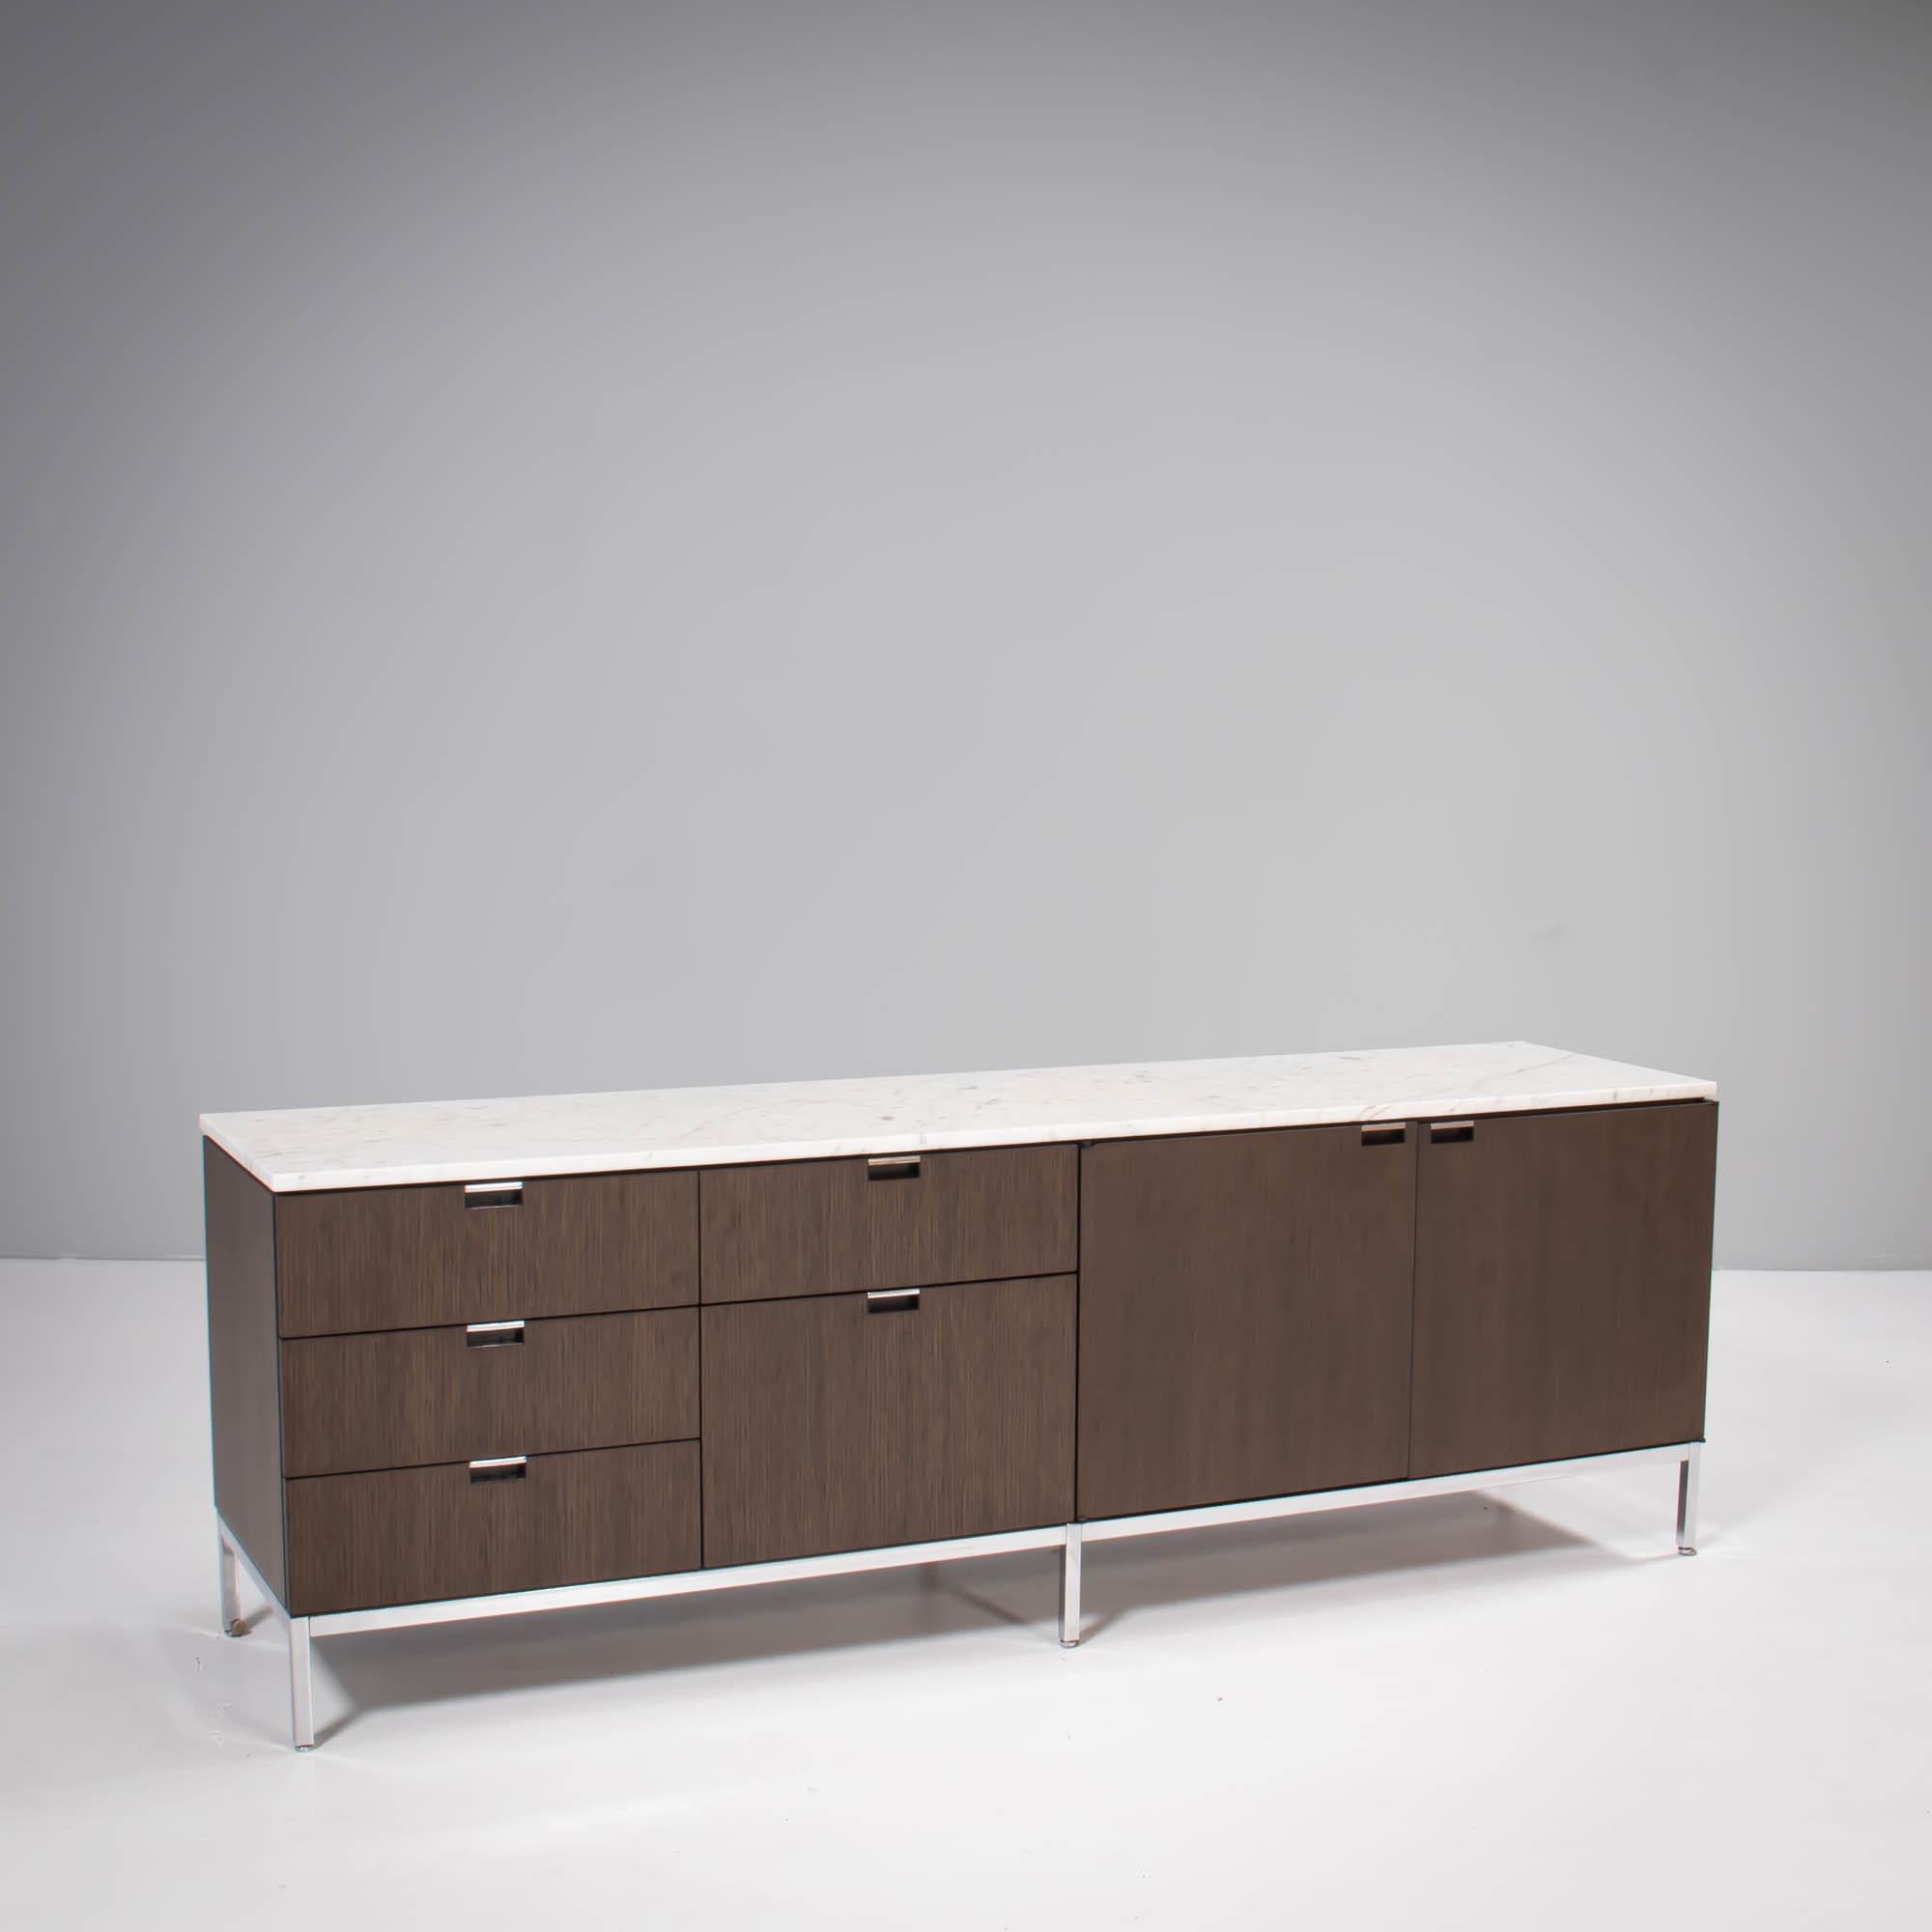 Originally designed in 1961, the Florence Knoll credenza has since become one of Knoll’s iconic furniture pieces.

Constructed from ebonised oak, the credenza sits on a square tubular steel base with a polished chrome finish.

With two cupboard